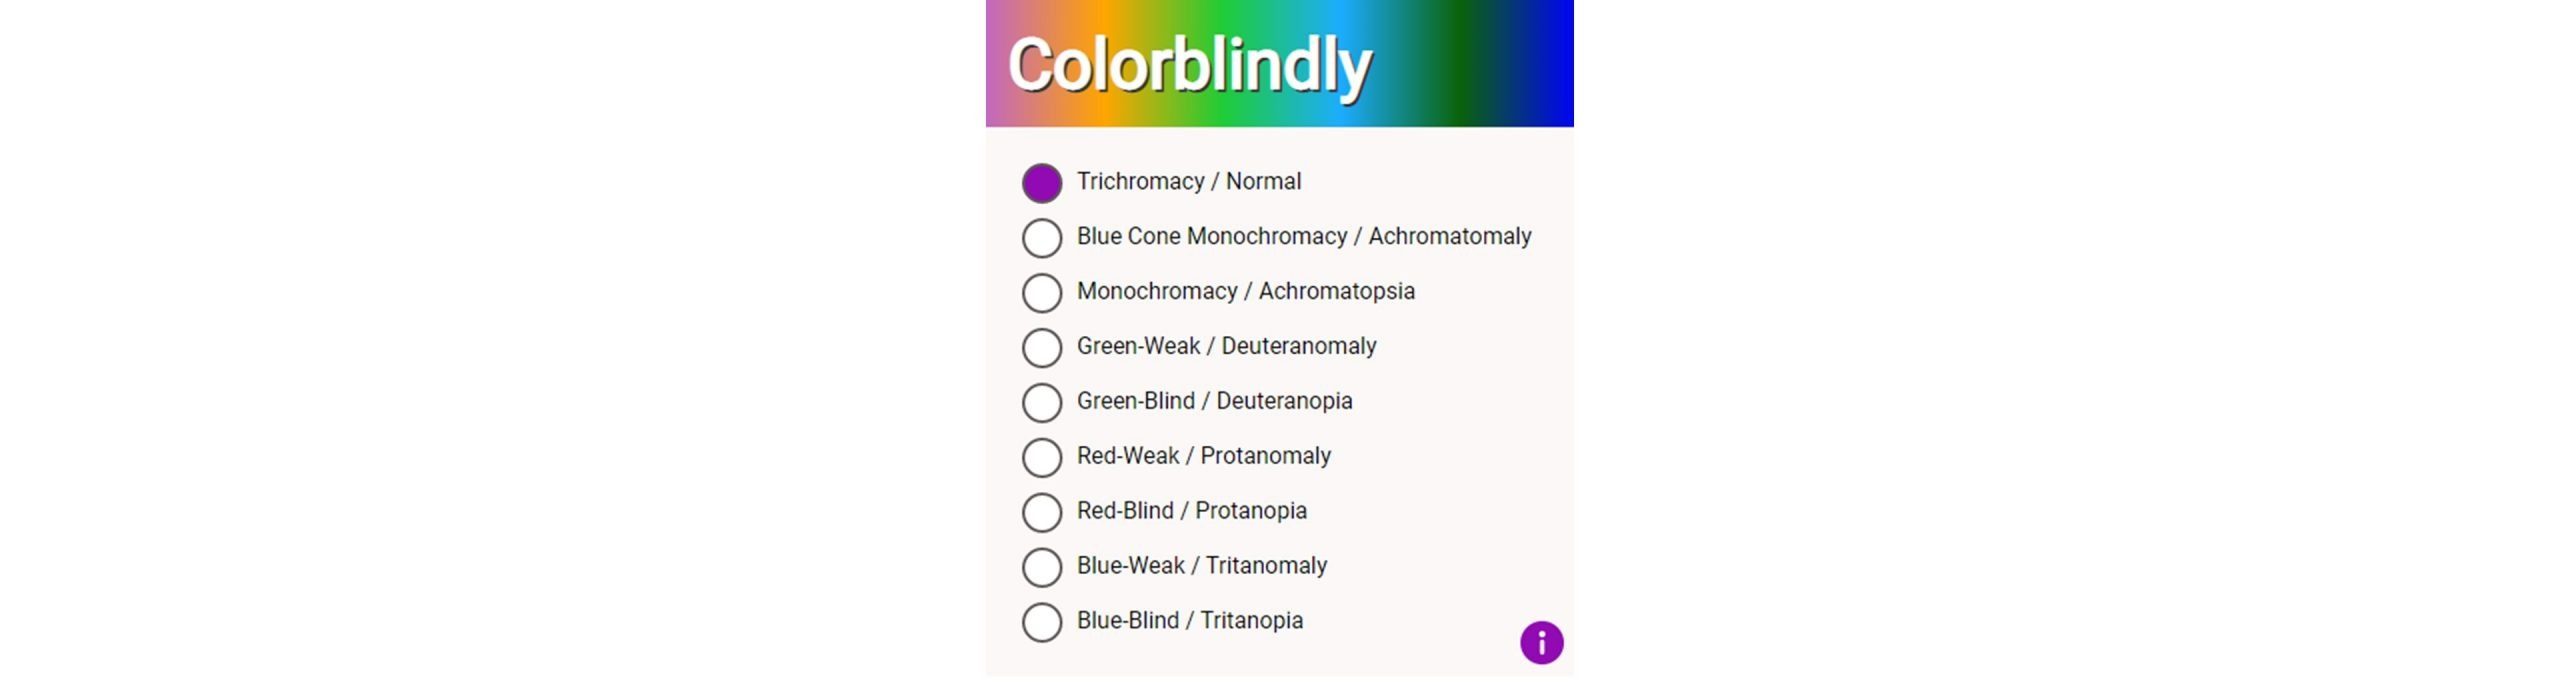 screenshot of colourblindness simulator Colorblindly